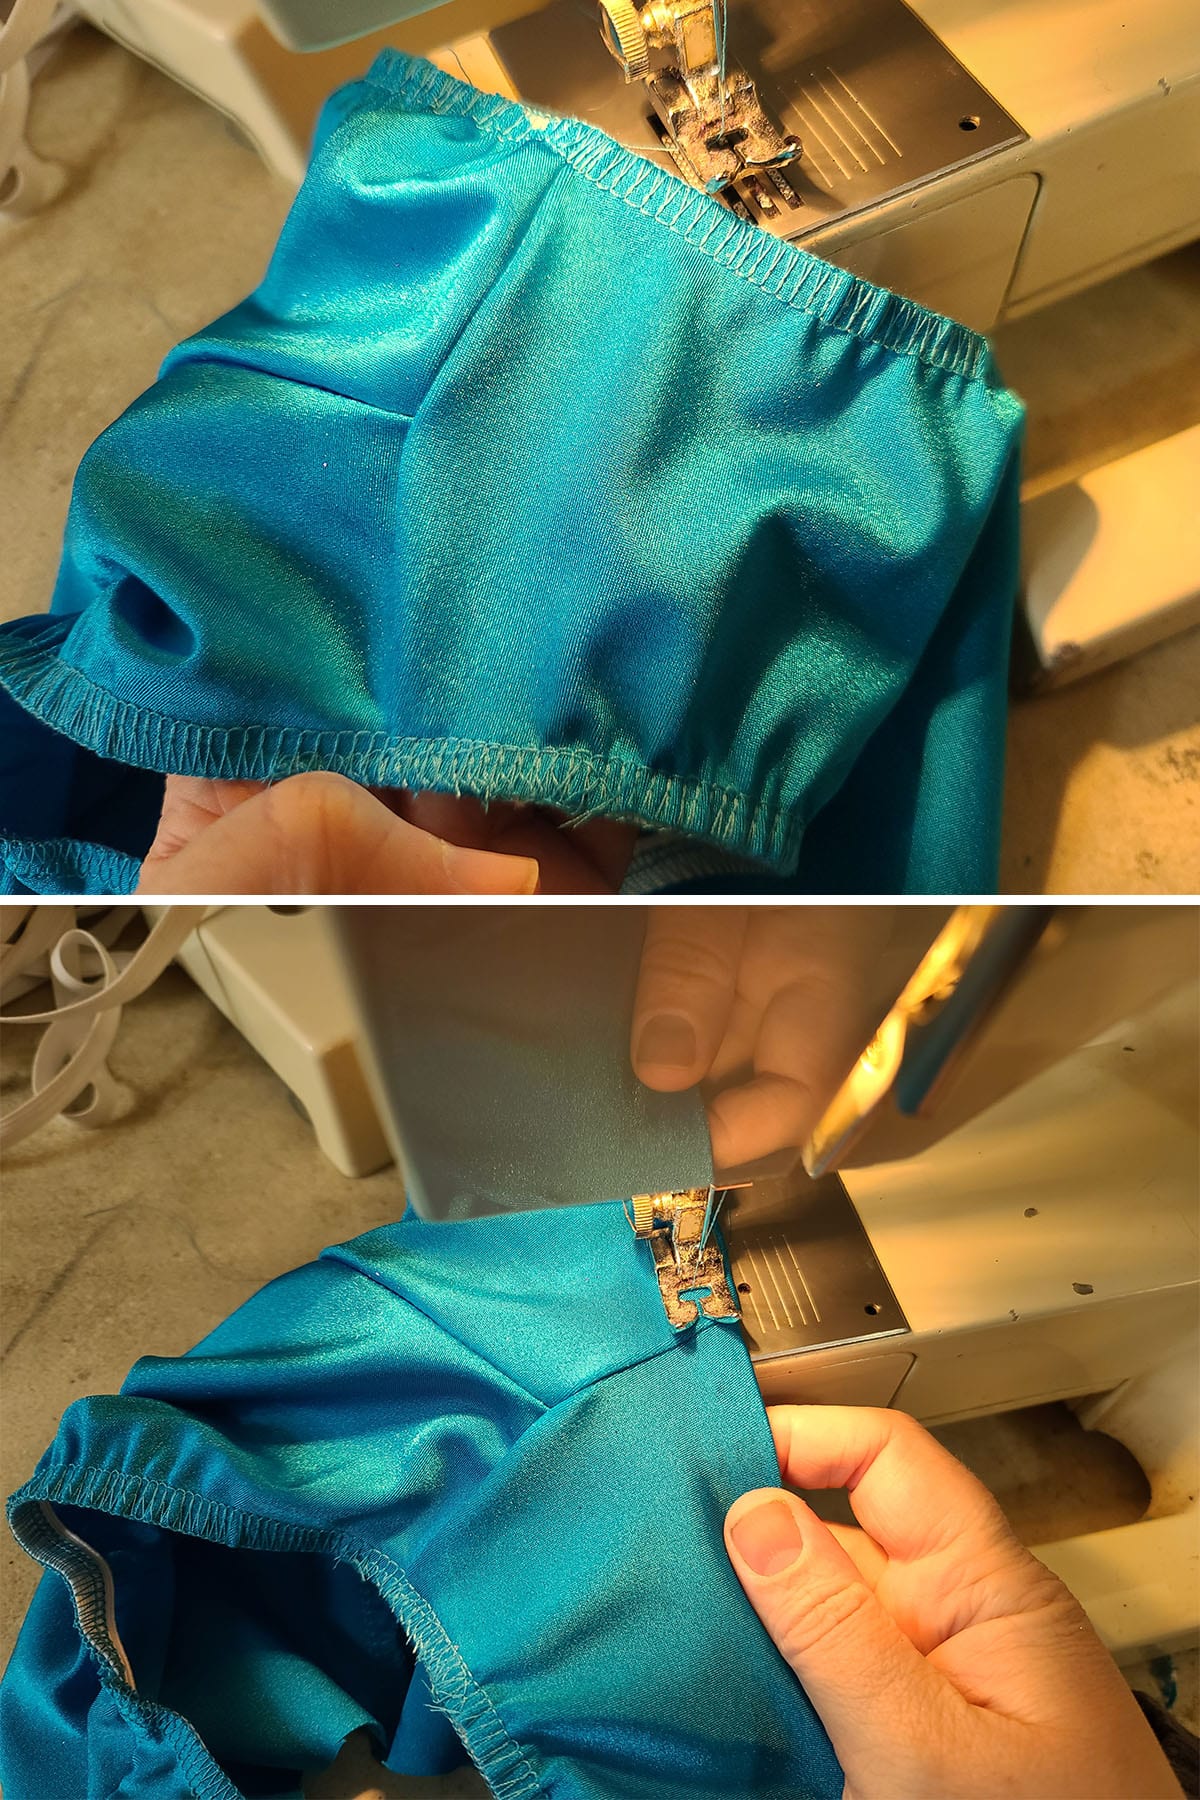 A 2 part image showing elastic being sewn into the skating skirt briefs.